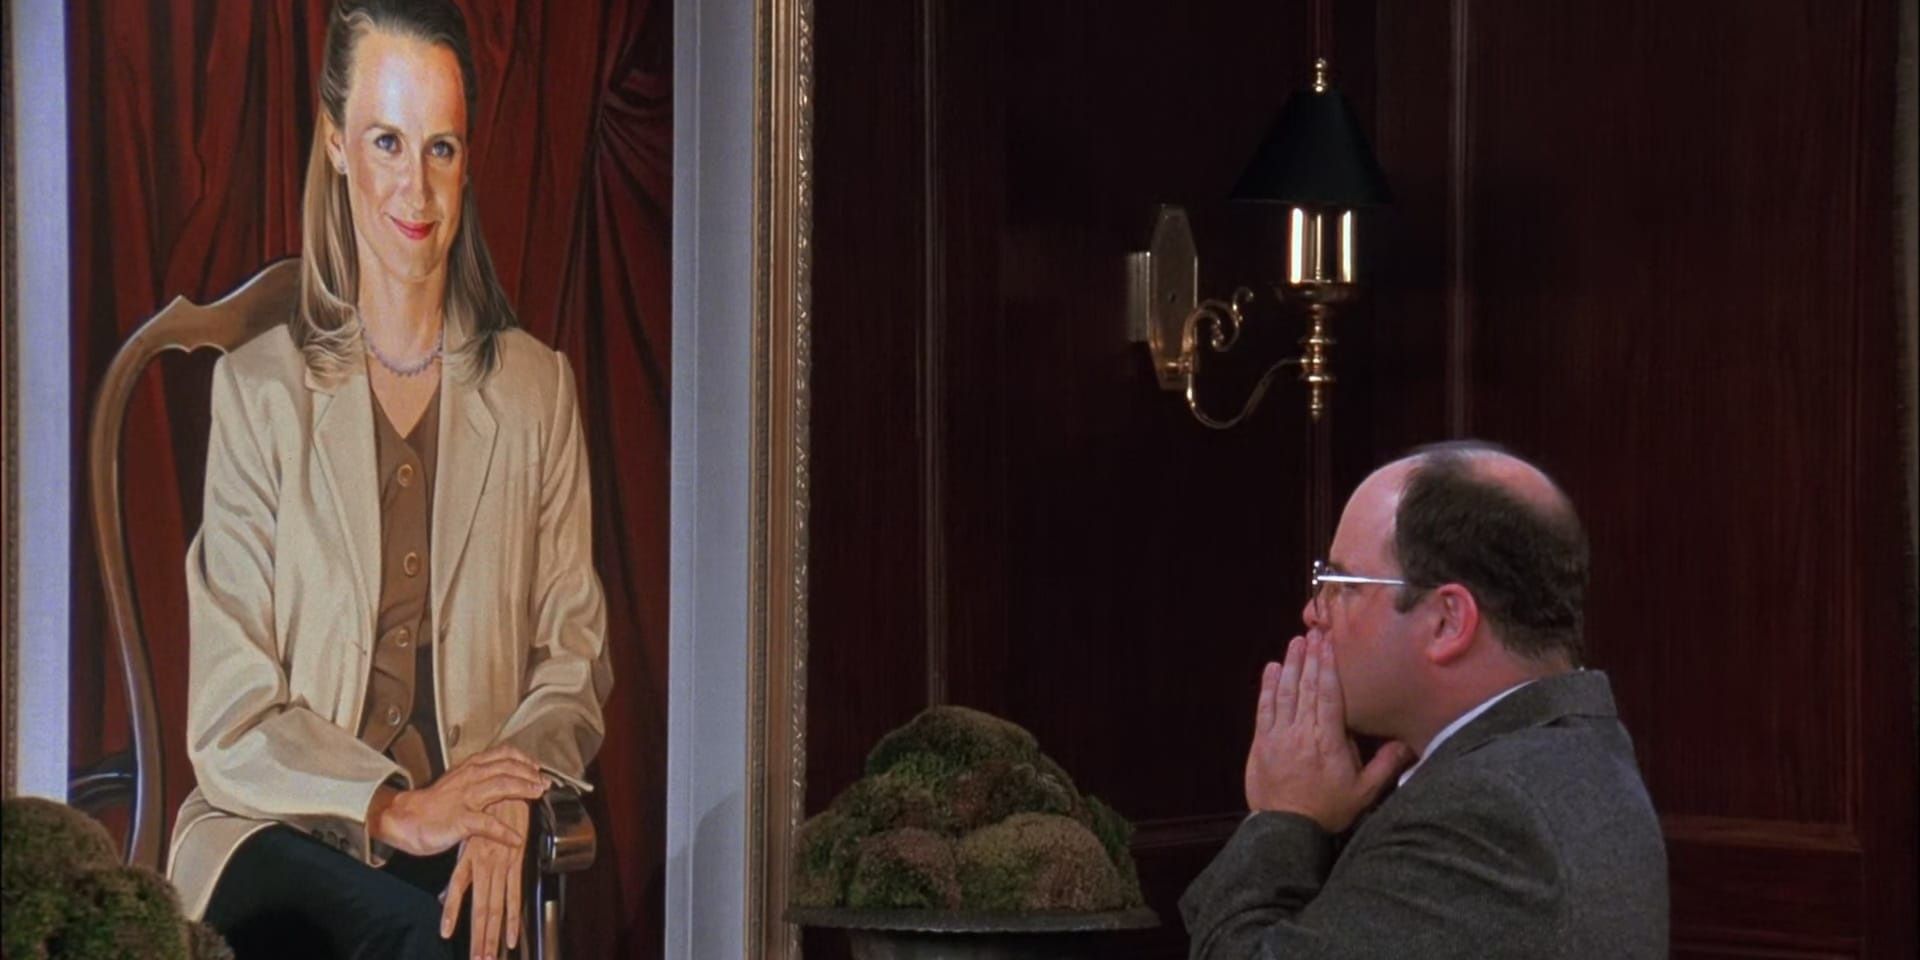 The Susan Ross Foundation and George in Seinfeld